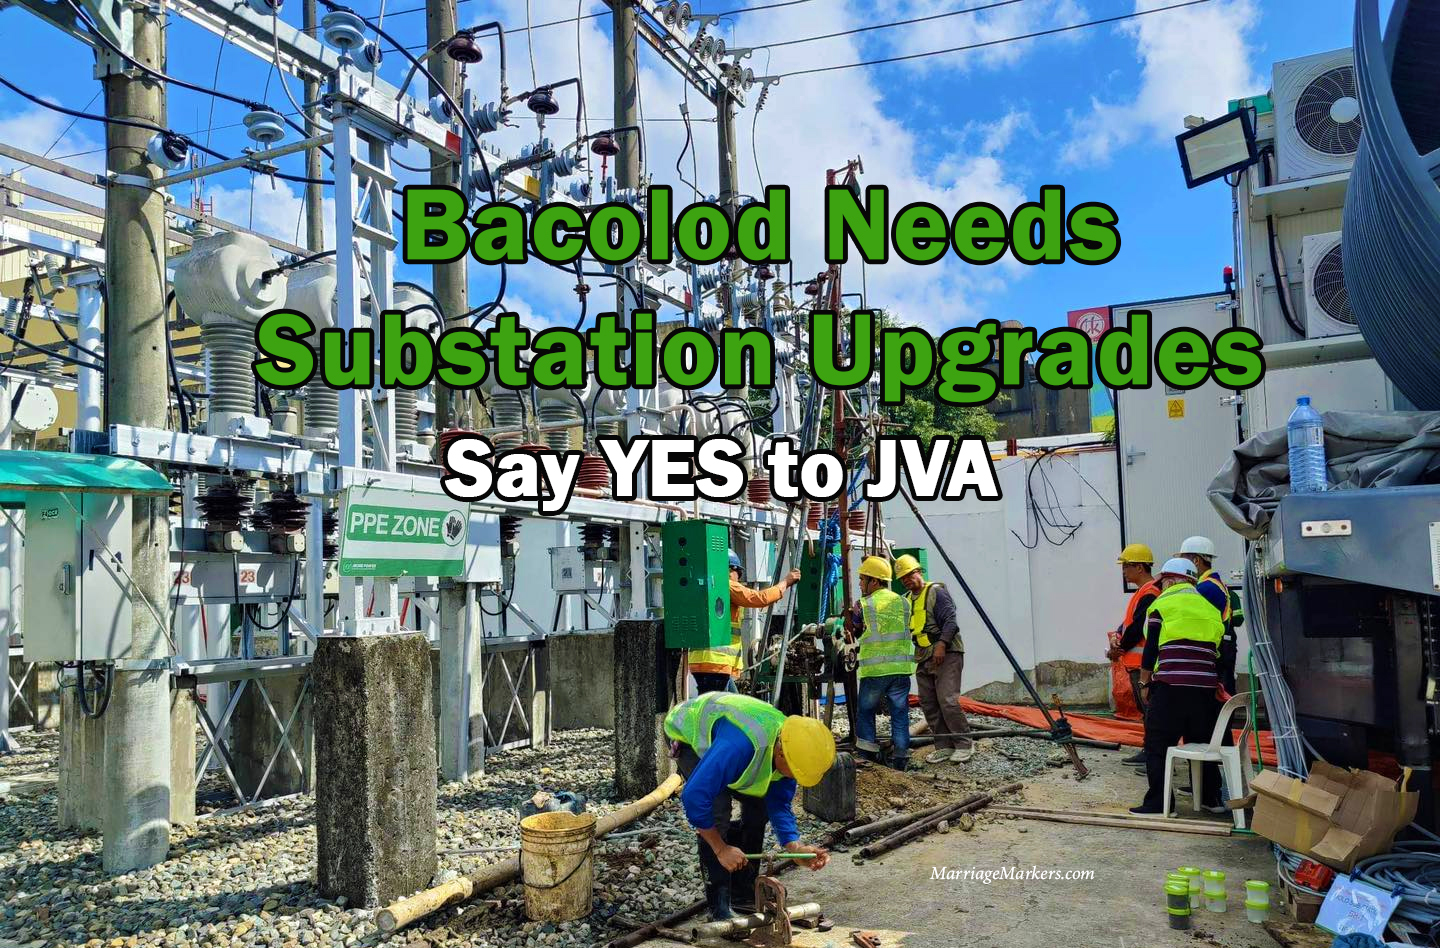 NEGROS Power - Primelectric - MORE Power SCADA-ready mobile substation - power distribution utility - electricity DU - electric supply in Iloilo - CENECO substation upgrade